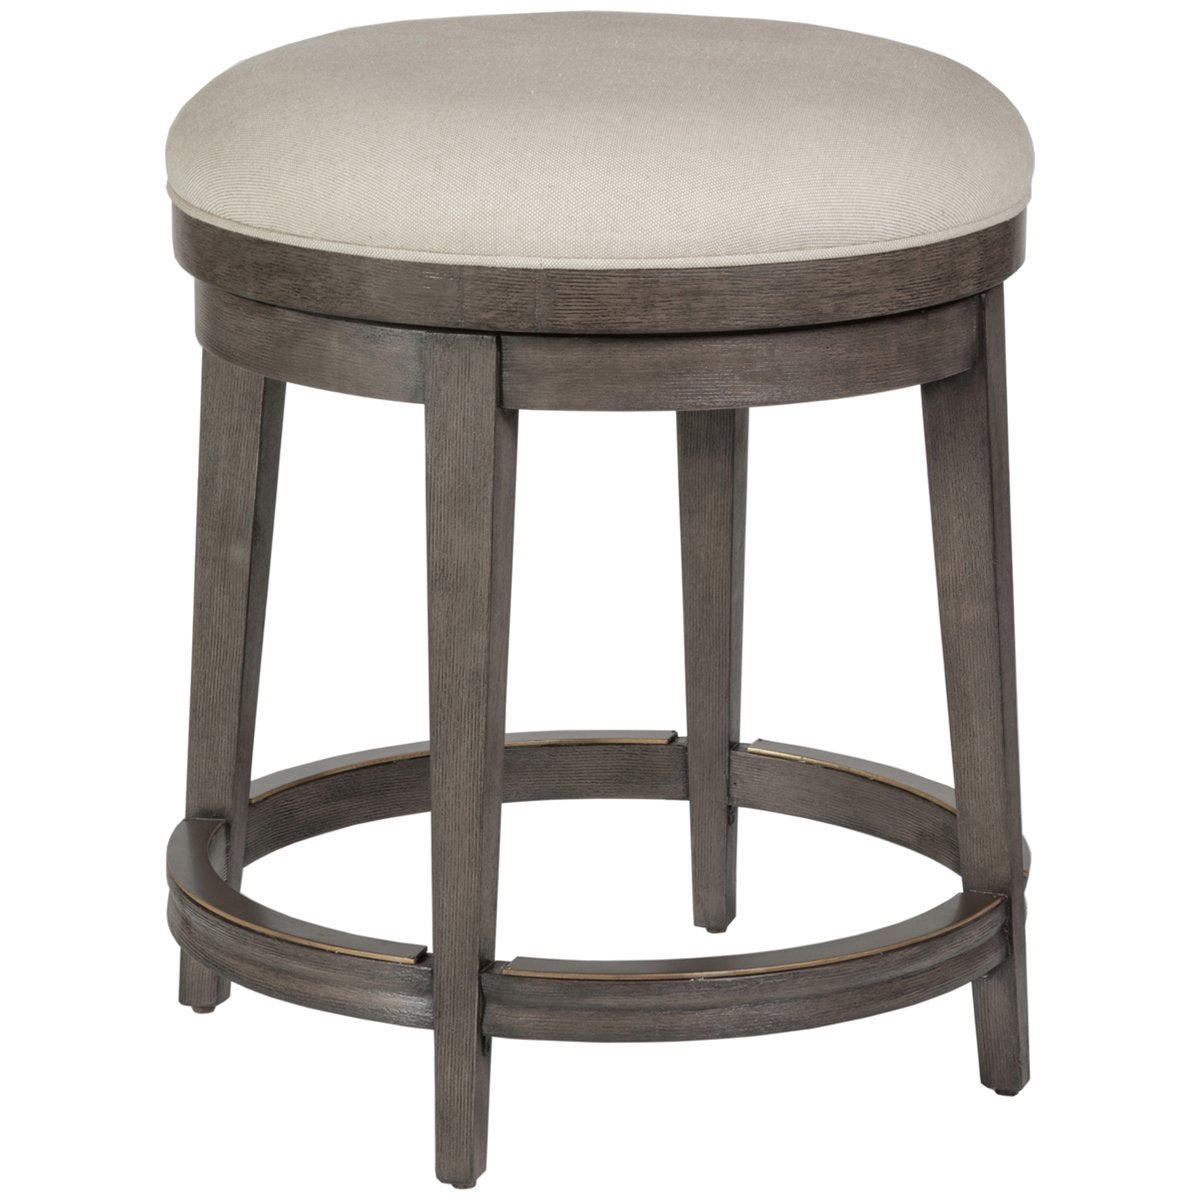 Artistica Home Cecile Backless Swivel Counter Stool 2221-897